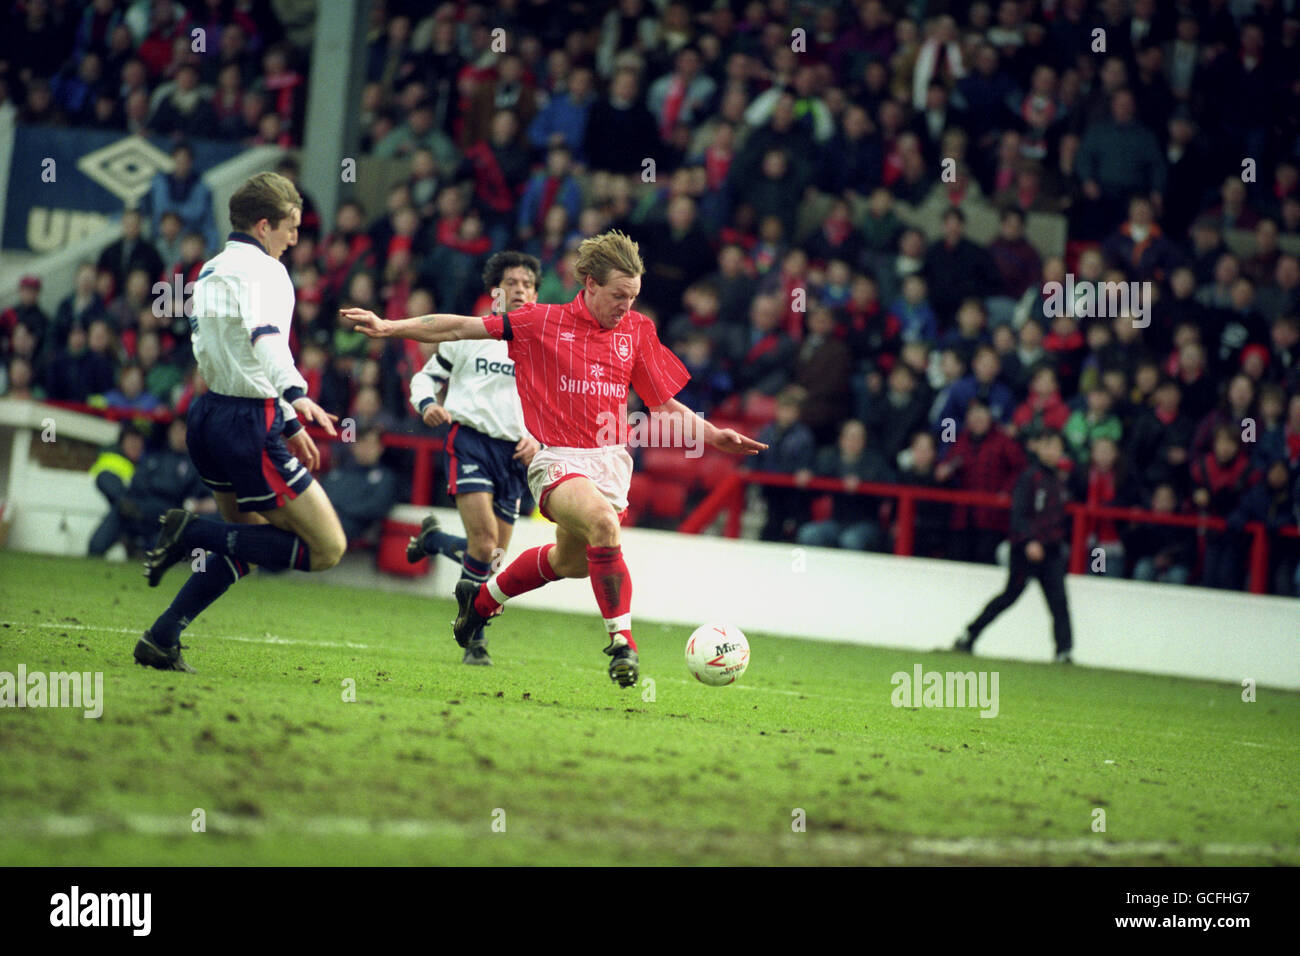 Soccer - Endsleigh League Division One - Nottingham Forest v Bolton Wanderers - City Ground Stock Photo